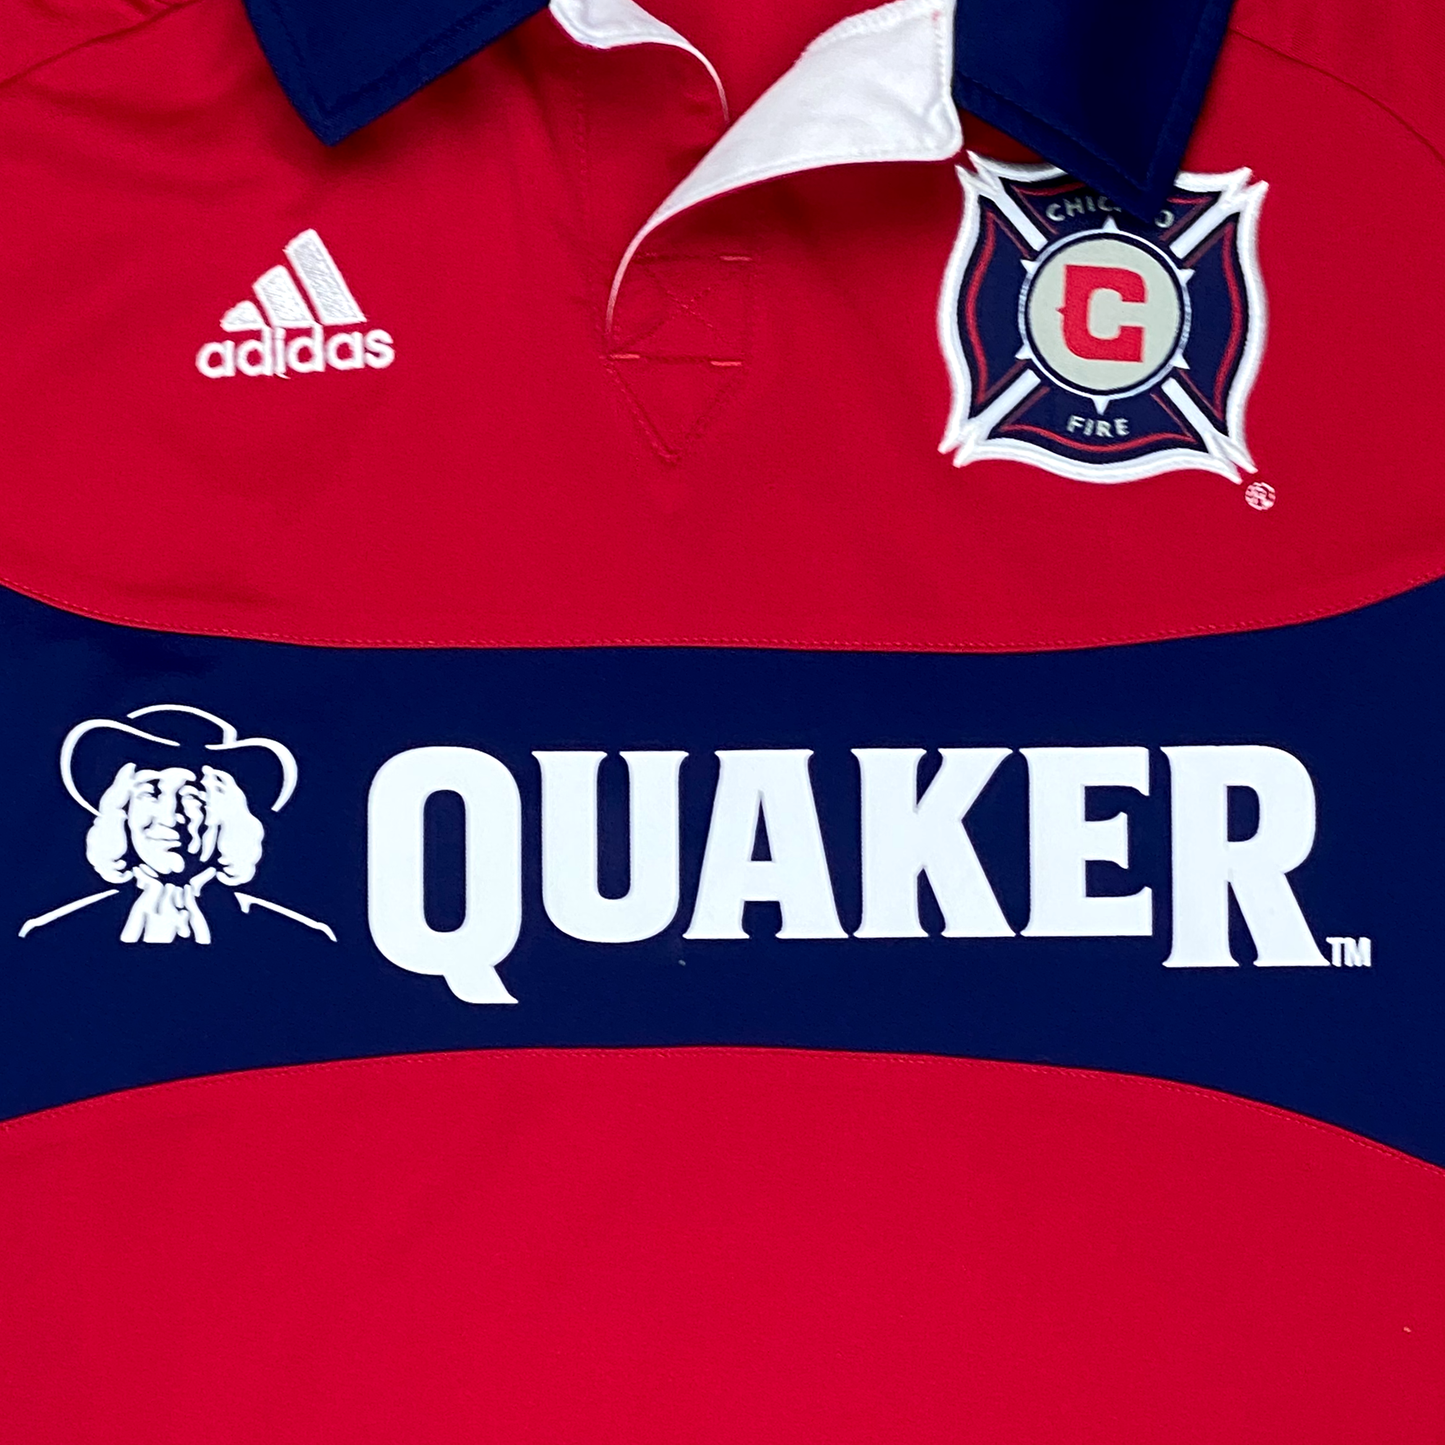 Chicago Fire Home Shirt (2012-14) - 13/14 Years